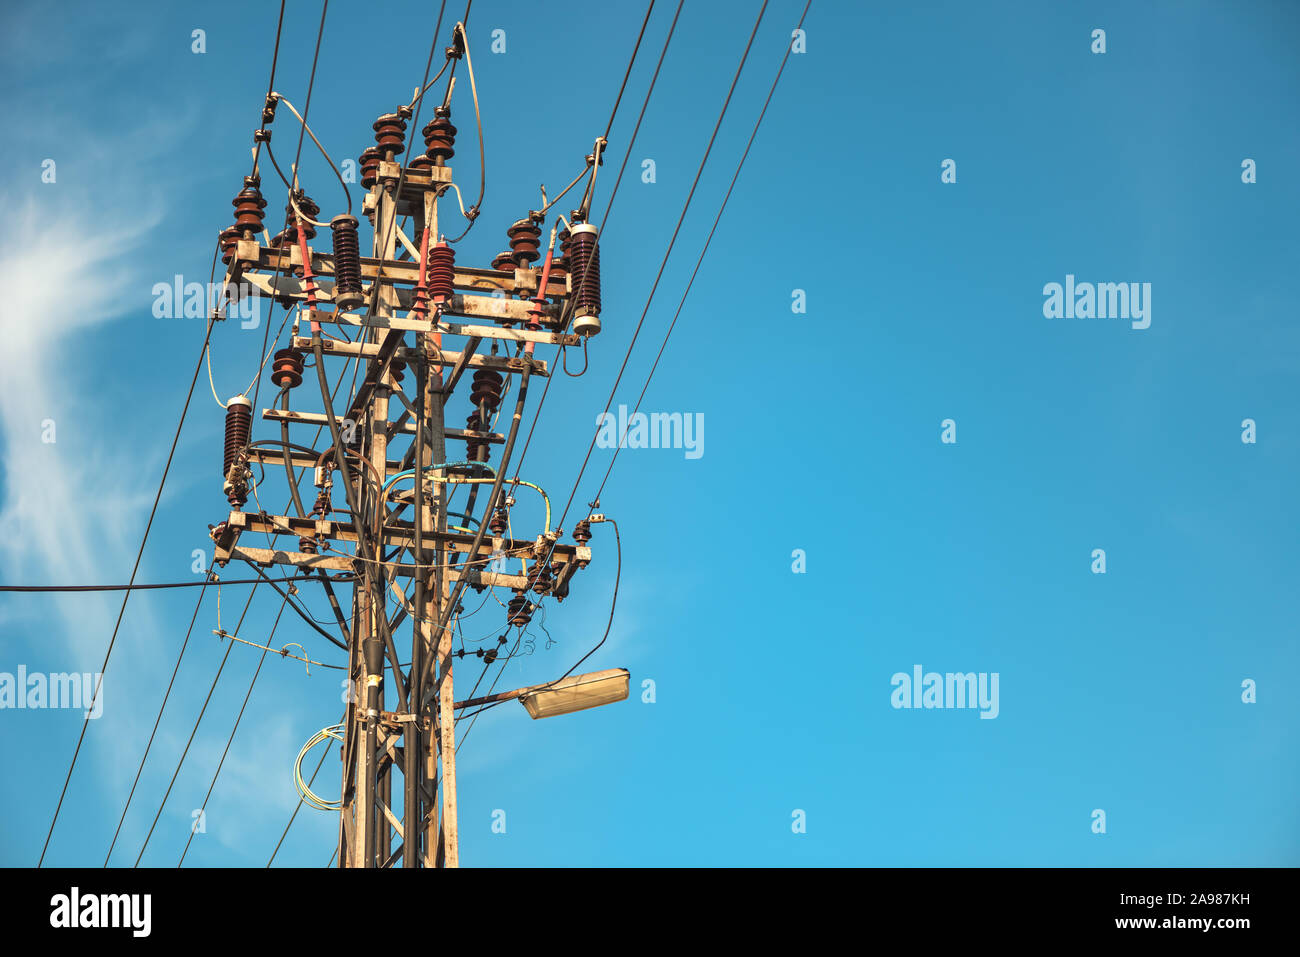 Utility pole supporting overhead power line cables against blue sky as copy space Stock Photo